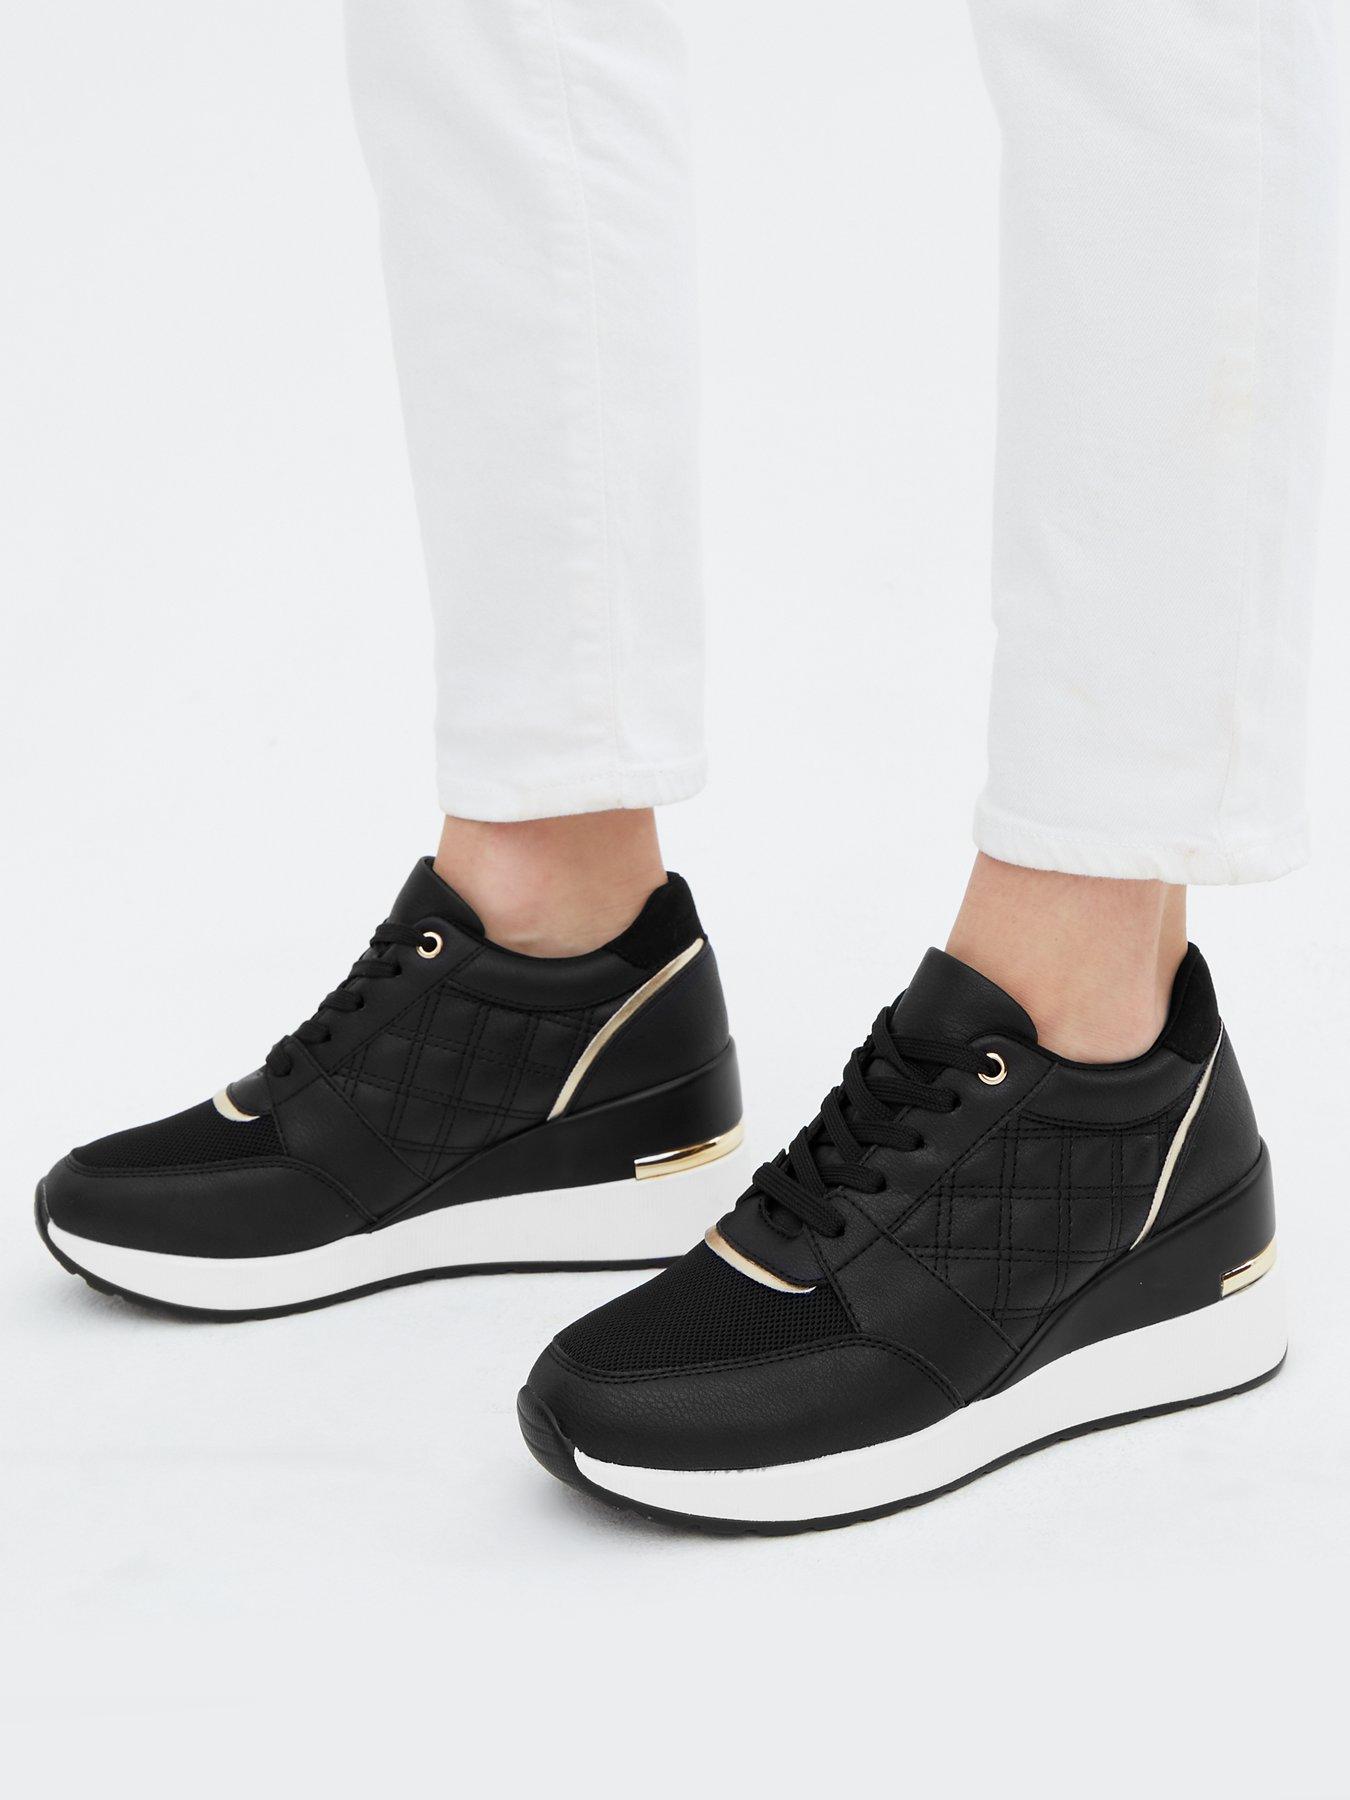  Black Quilted Metal Trim Wedge Trainers